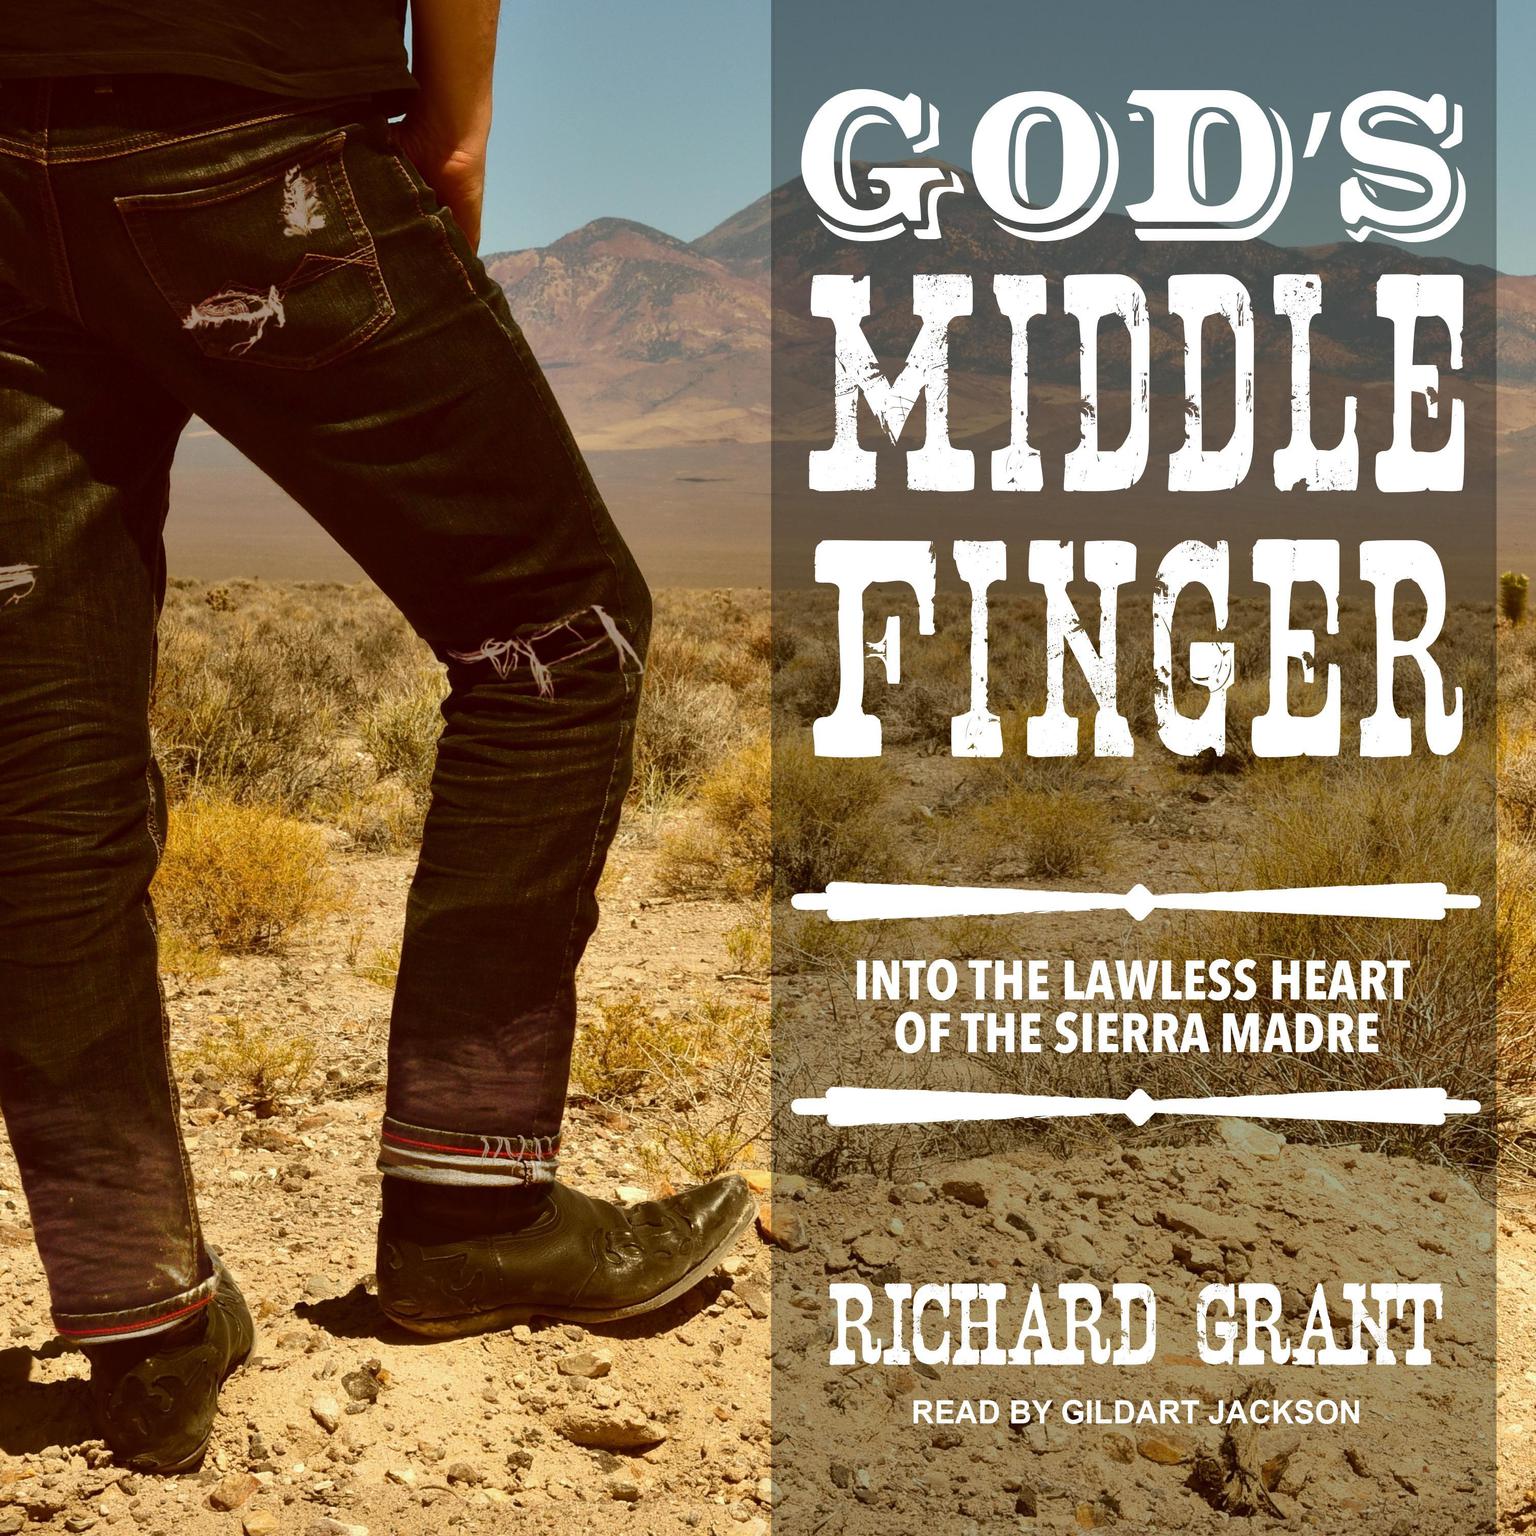 Gods Middle Finger: Into the Lawless Heart of the Sierra Madre Audiobook, by Richard Grant